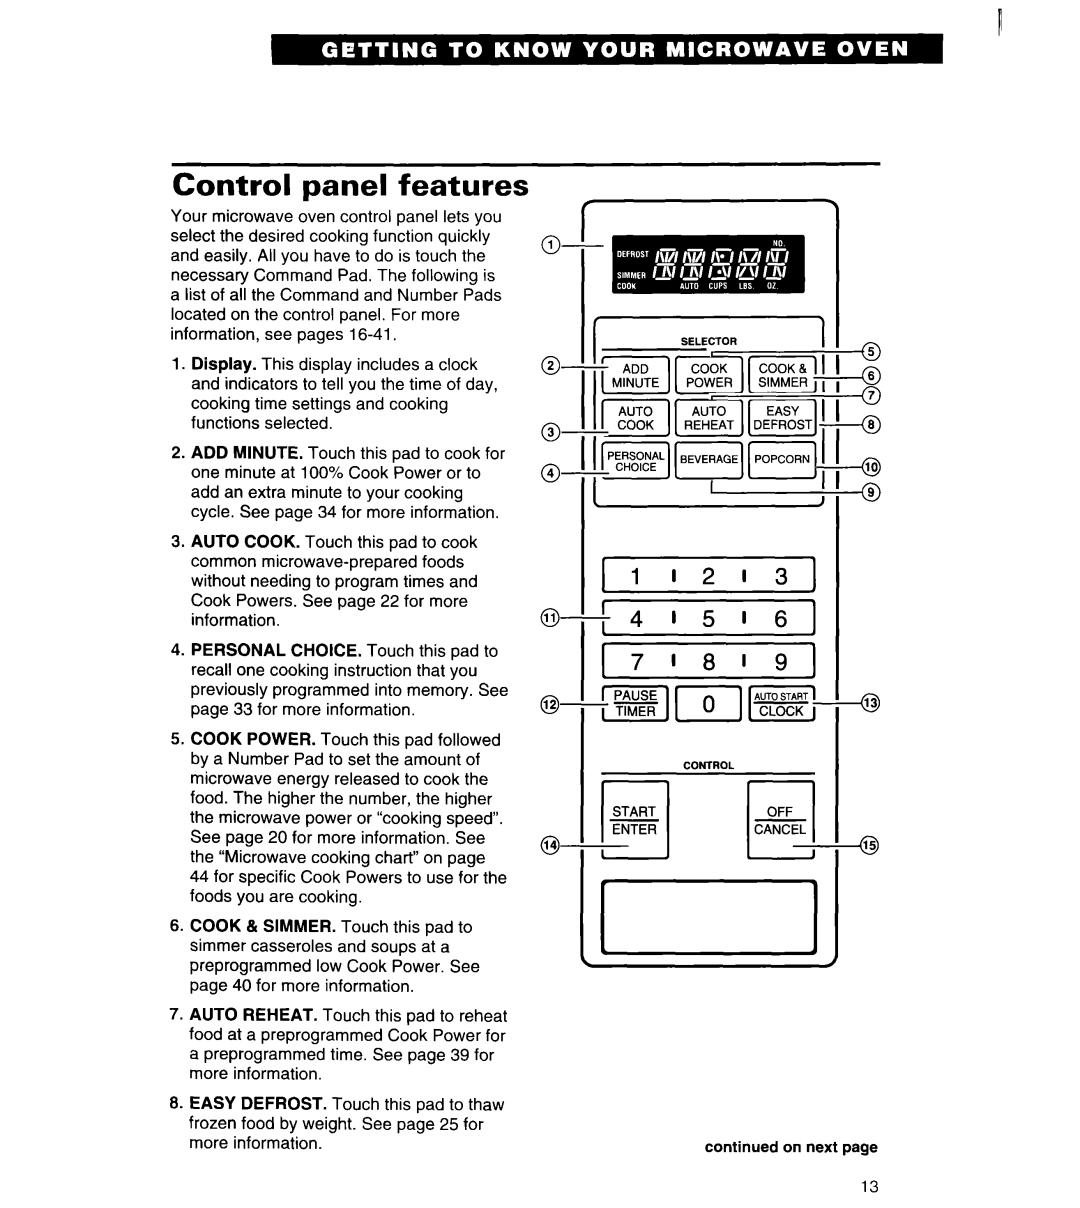 Whirlpool MT6120XBB, MT6120XBQ installation instructions o- o, @ @ @, Control panel features, o- -I a 